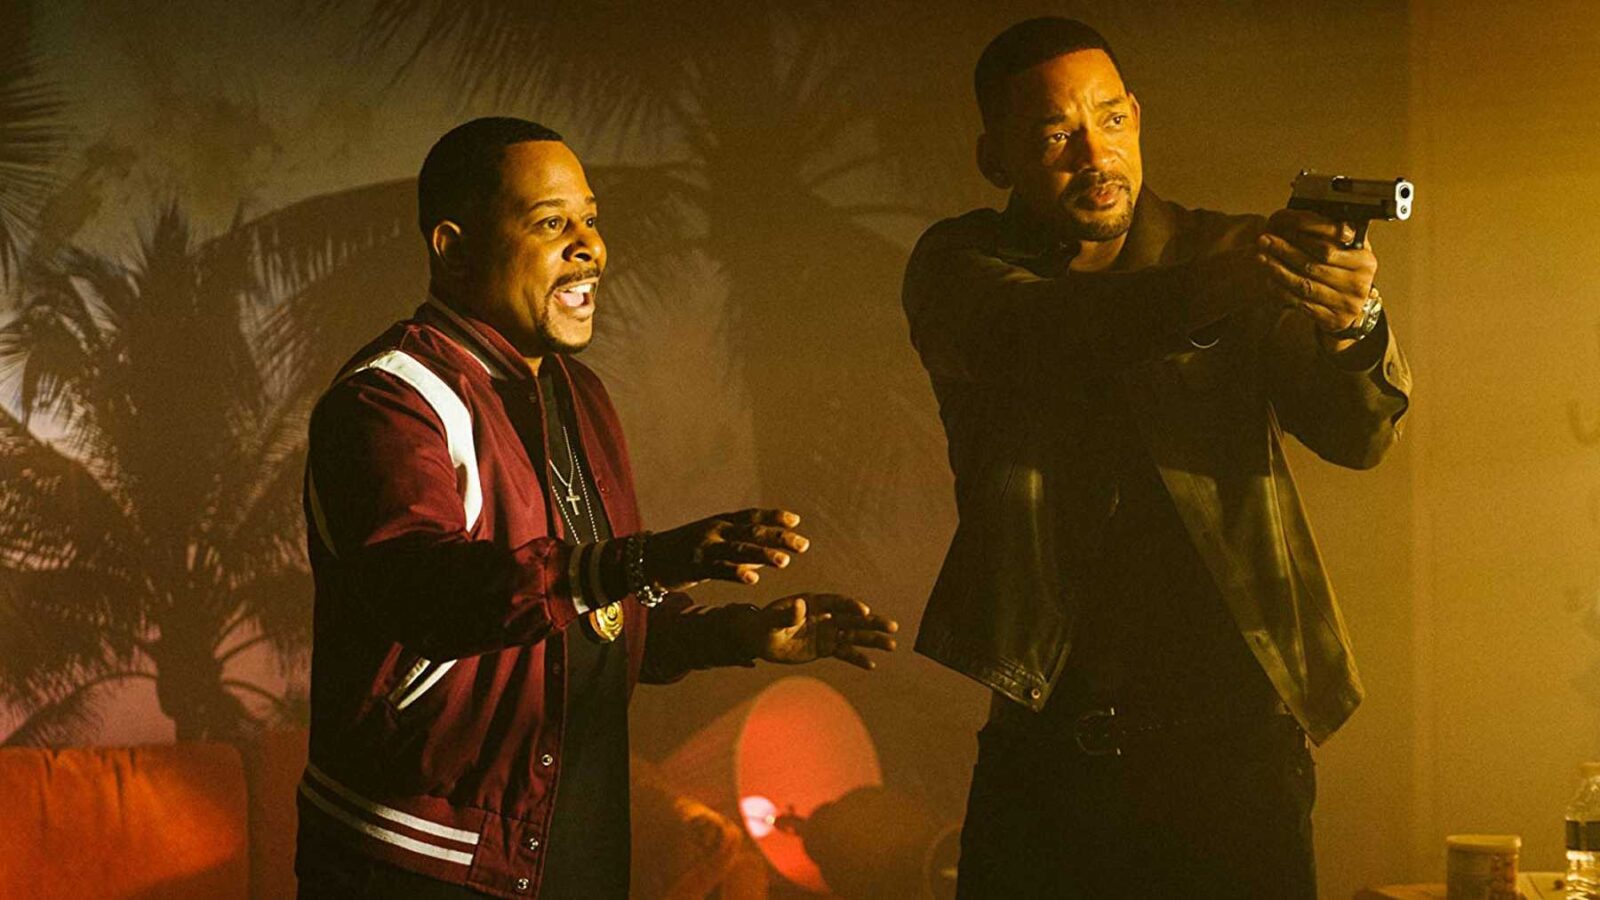 Image from "Bad Boys for Life". Courtesy of Sony/Columbia Pictures